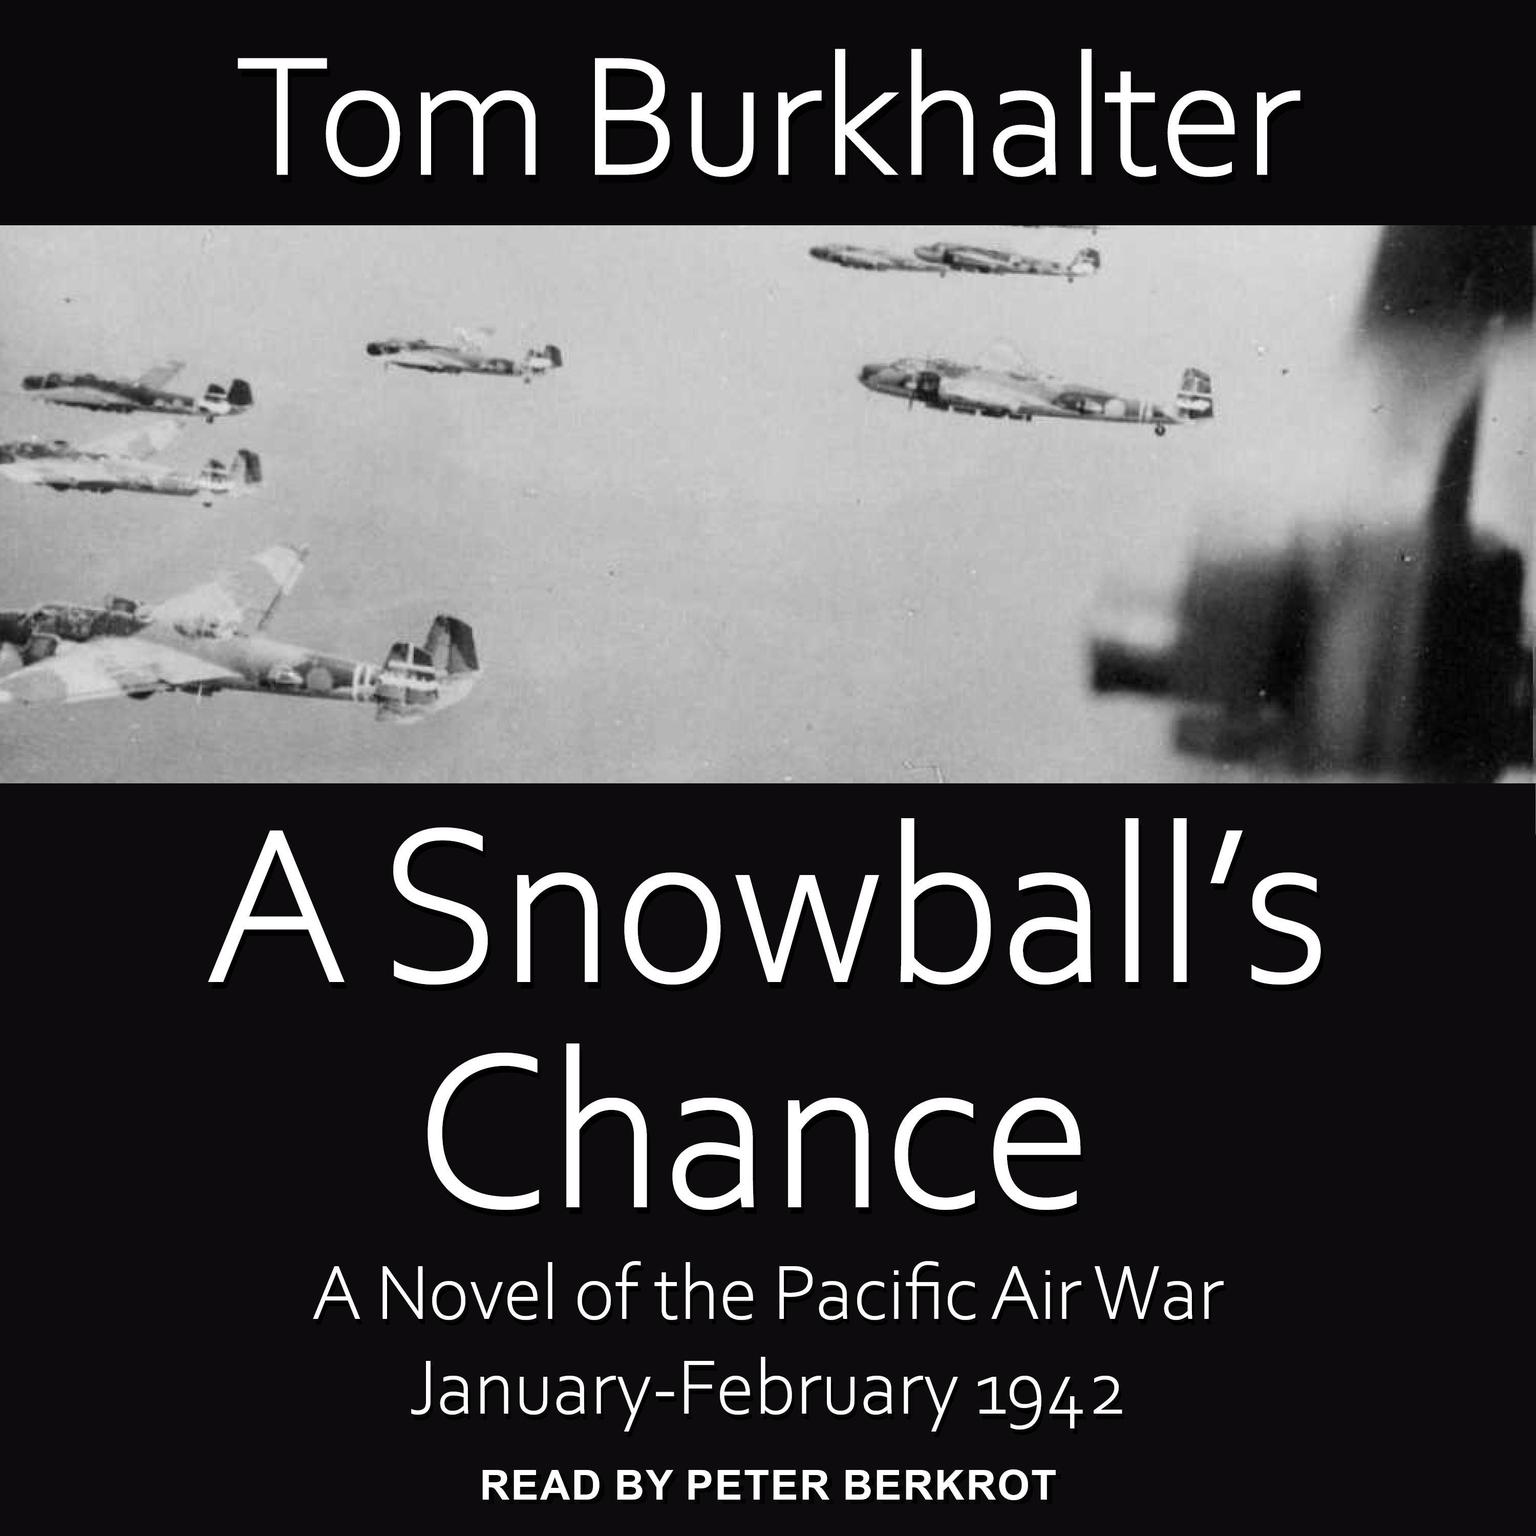 A Snowball’s Chance: A Novel of the Pacific Air War January-February 1942 Audiobook, by Tom Burkhalter